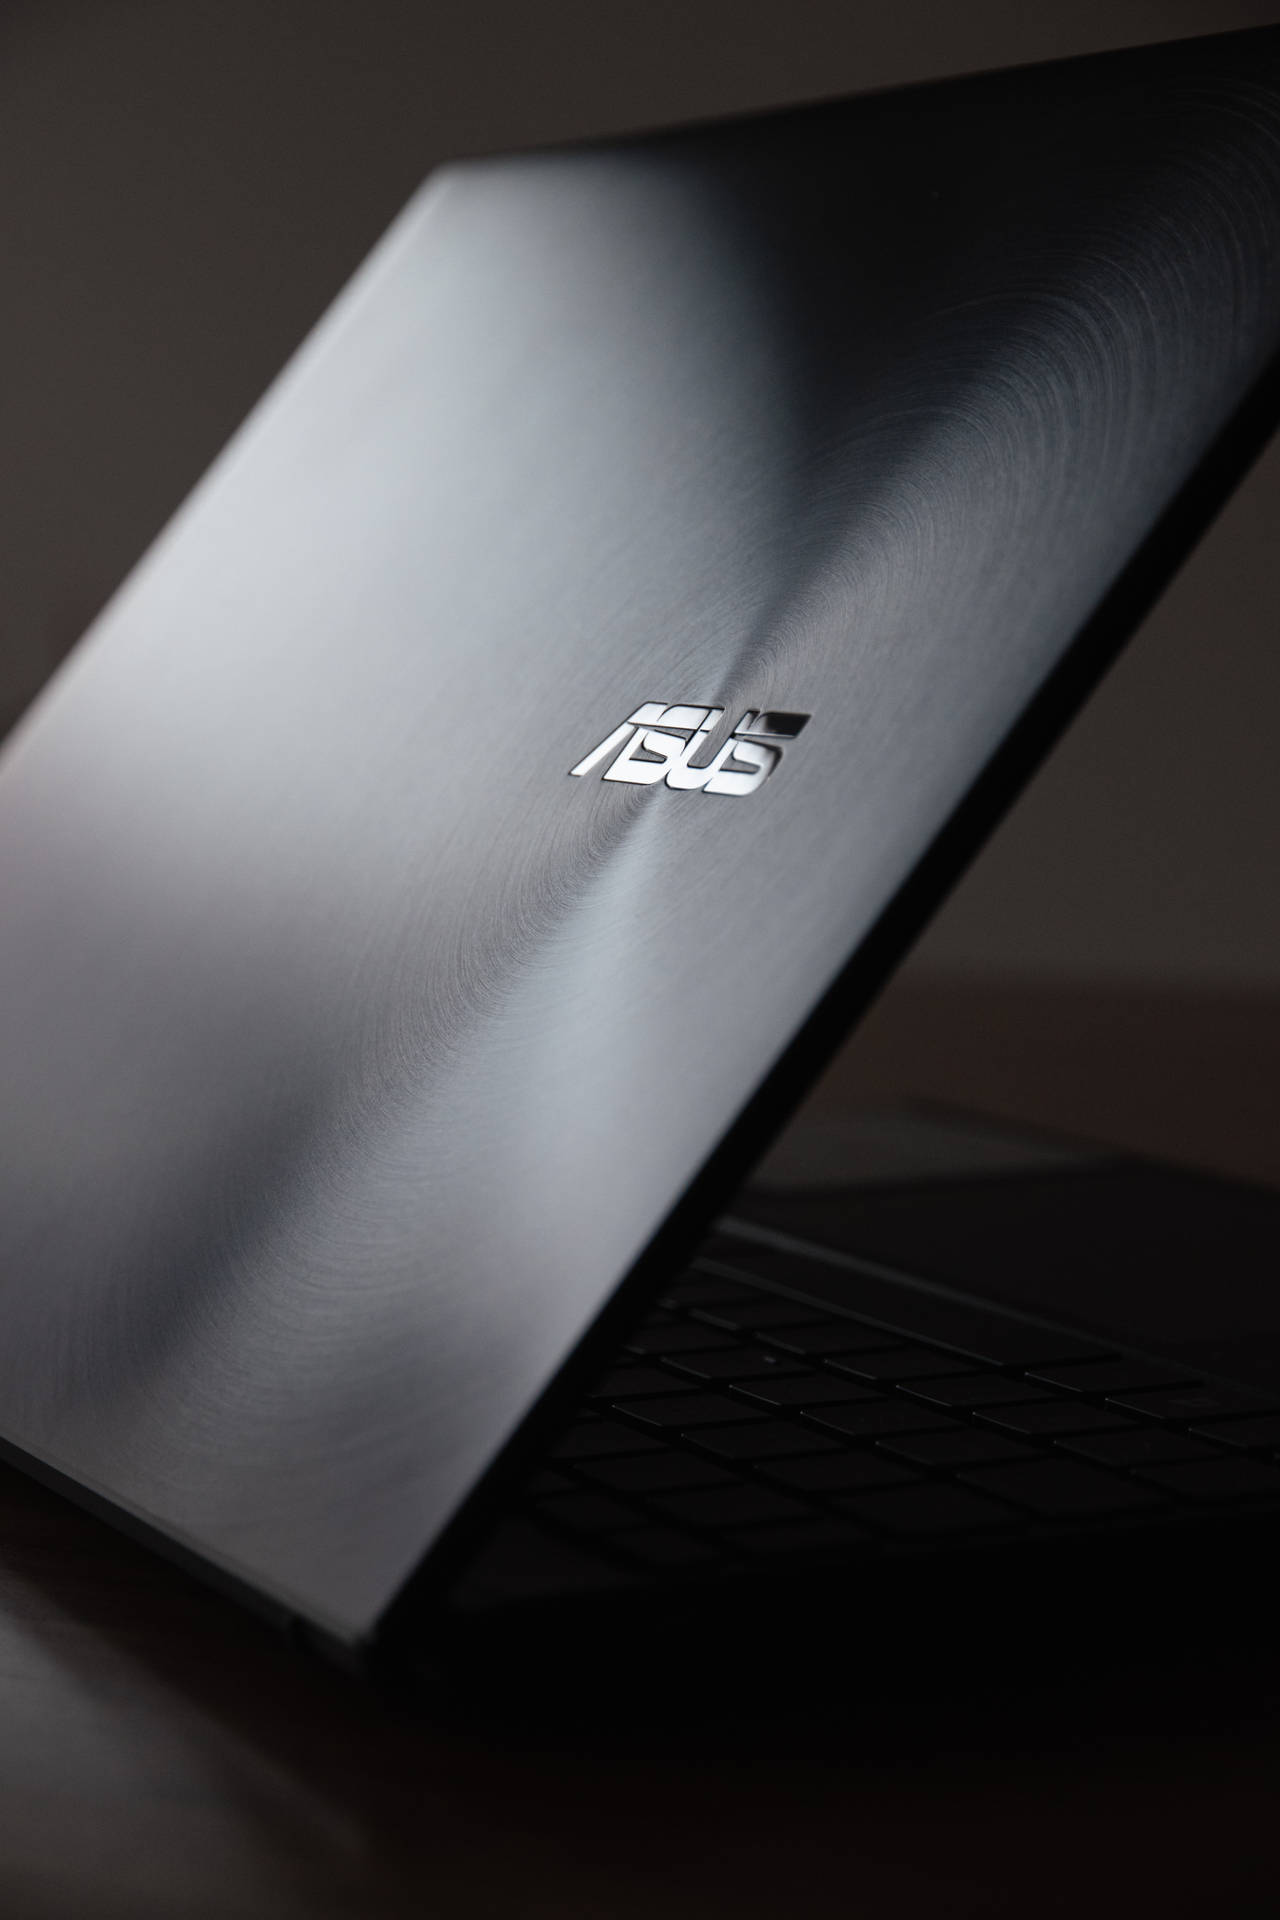 4555X6833 Asus Wallpaper and Background